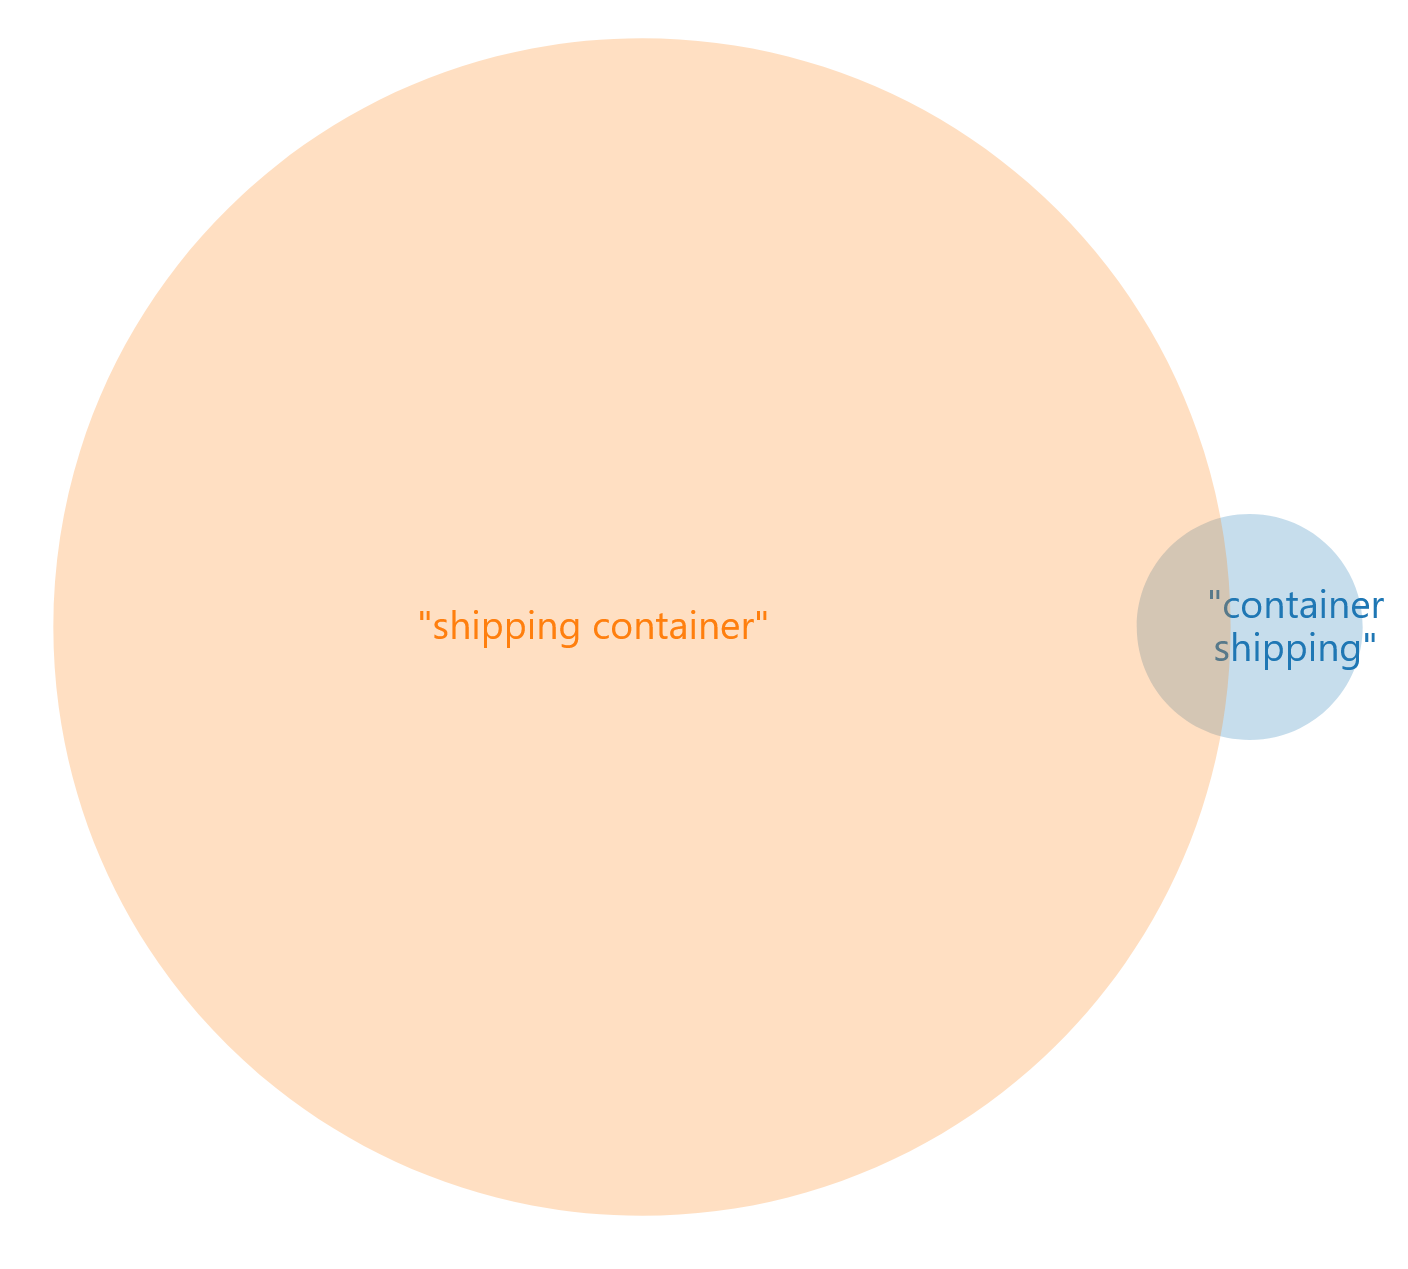 Venn diagram comparing sets for 'shipping container' and 'container shipping'